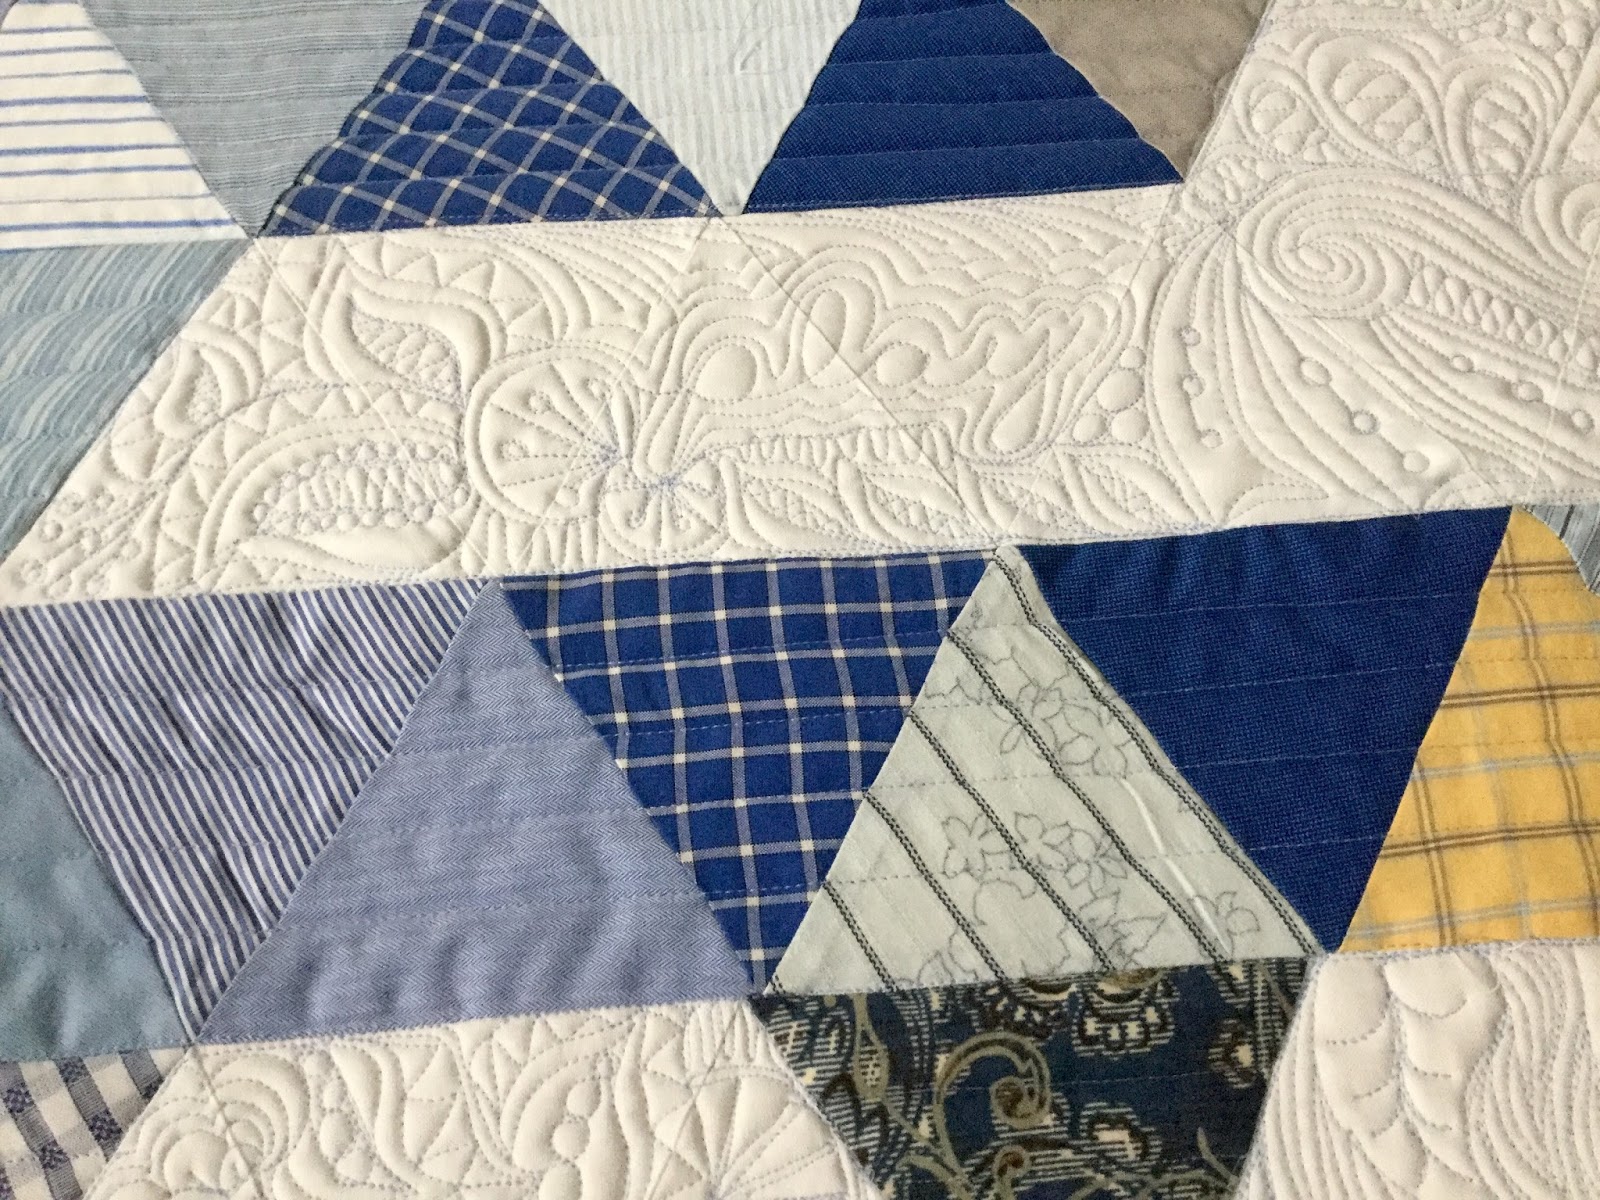 Sue Daurio's Quilting : Graffiti Quilts - Not Planned and Planned